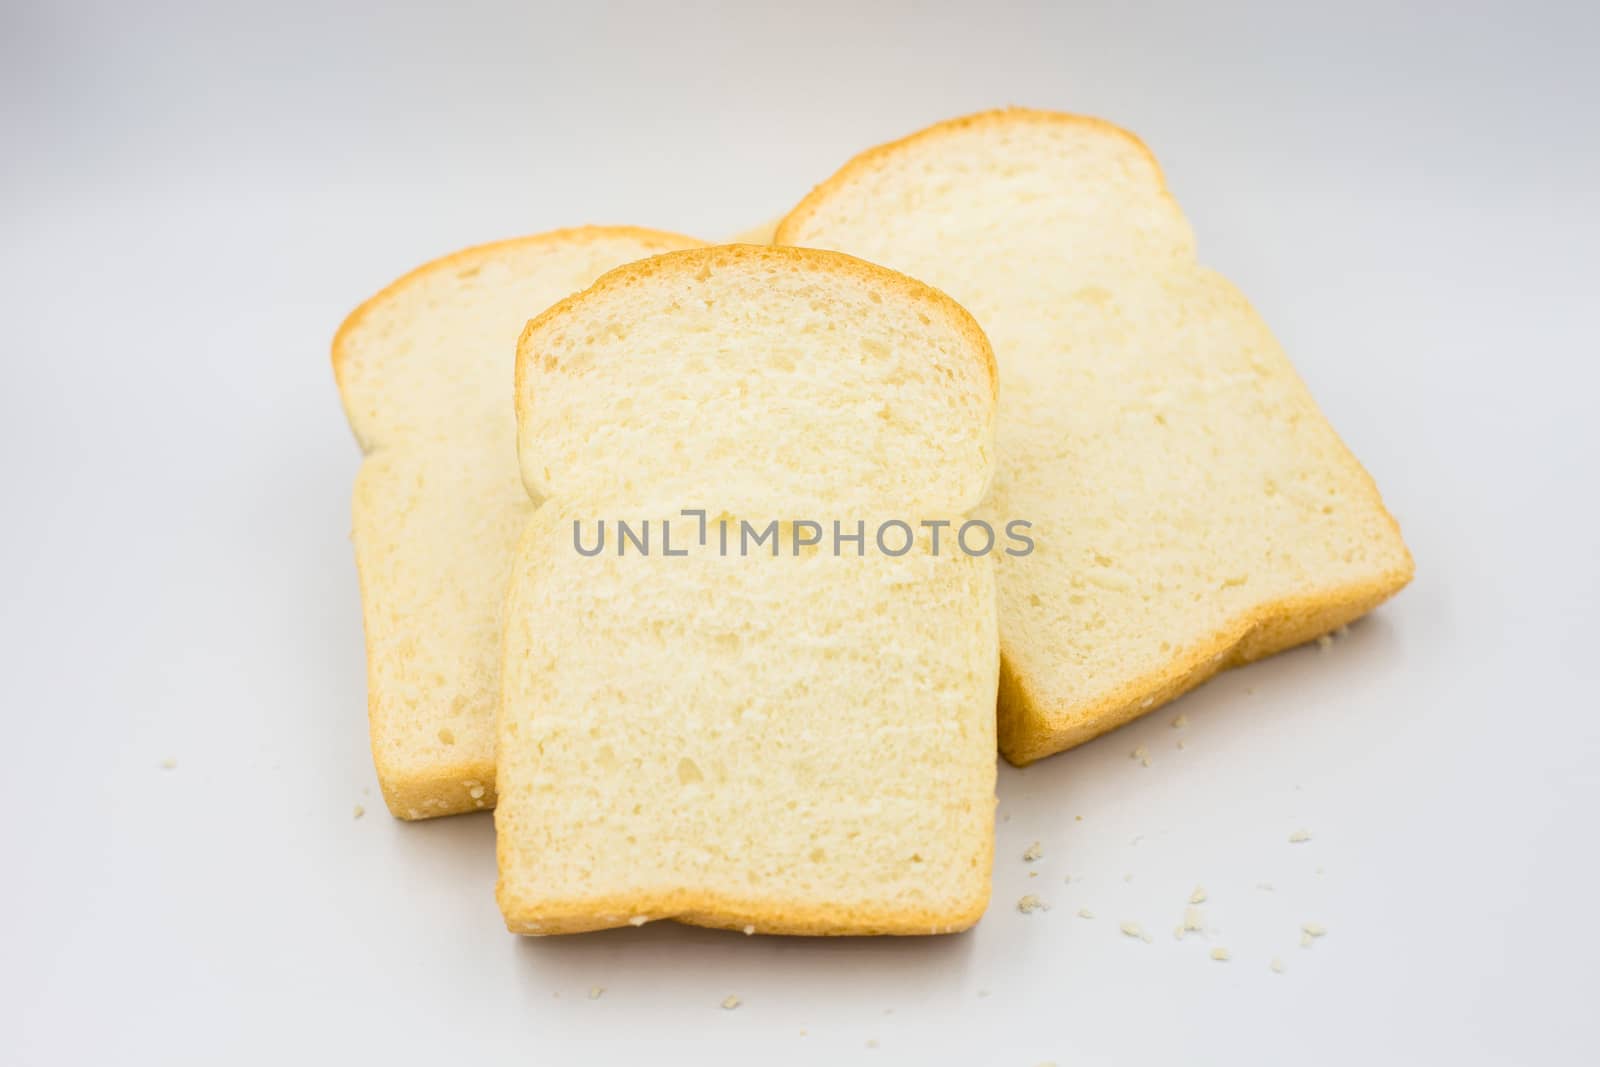 Three slices of bread on a white background.